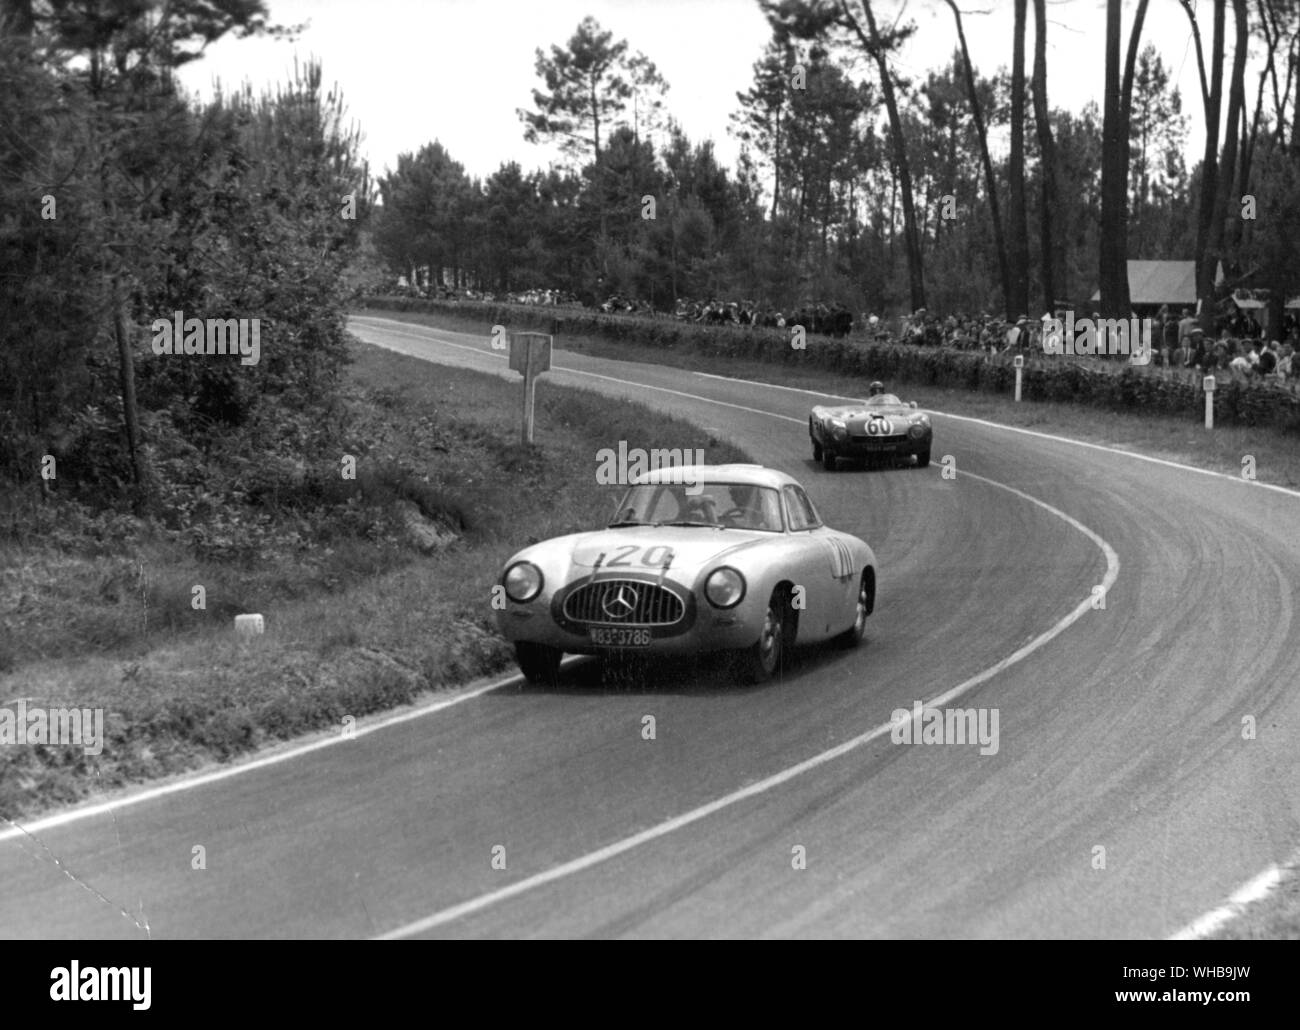 German team Mercedes-Benz 300 SL car competitor during the 24 hour Le Mans endurance motor race ahead on corner from French Monopole X84 Panhard car. 14 June 1952 Stock Photo